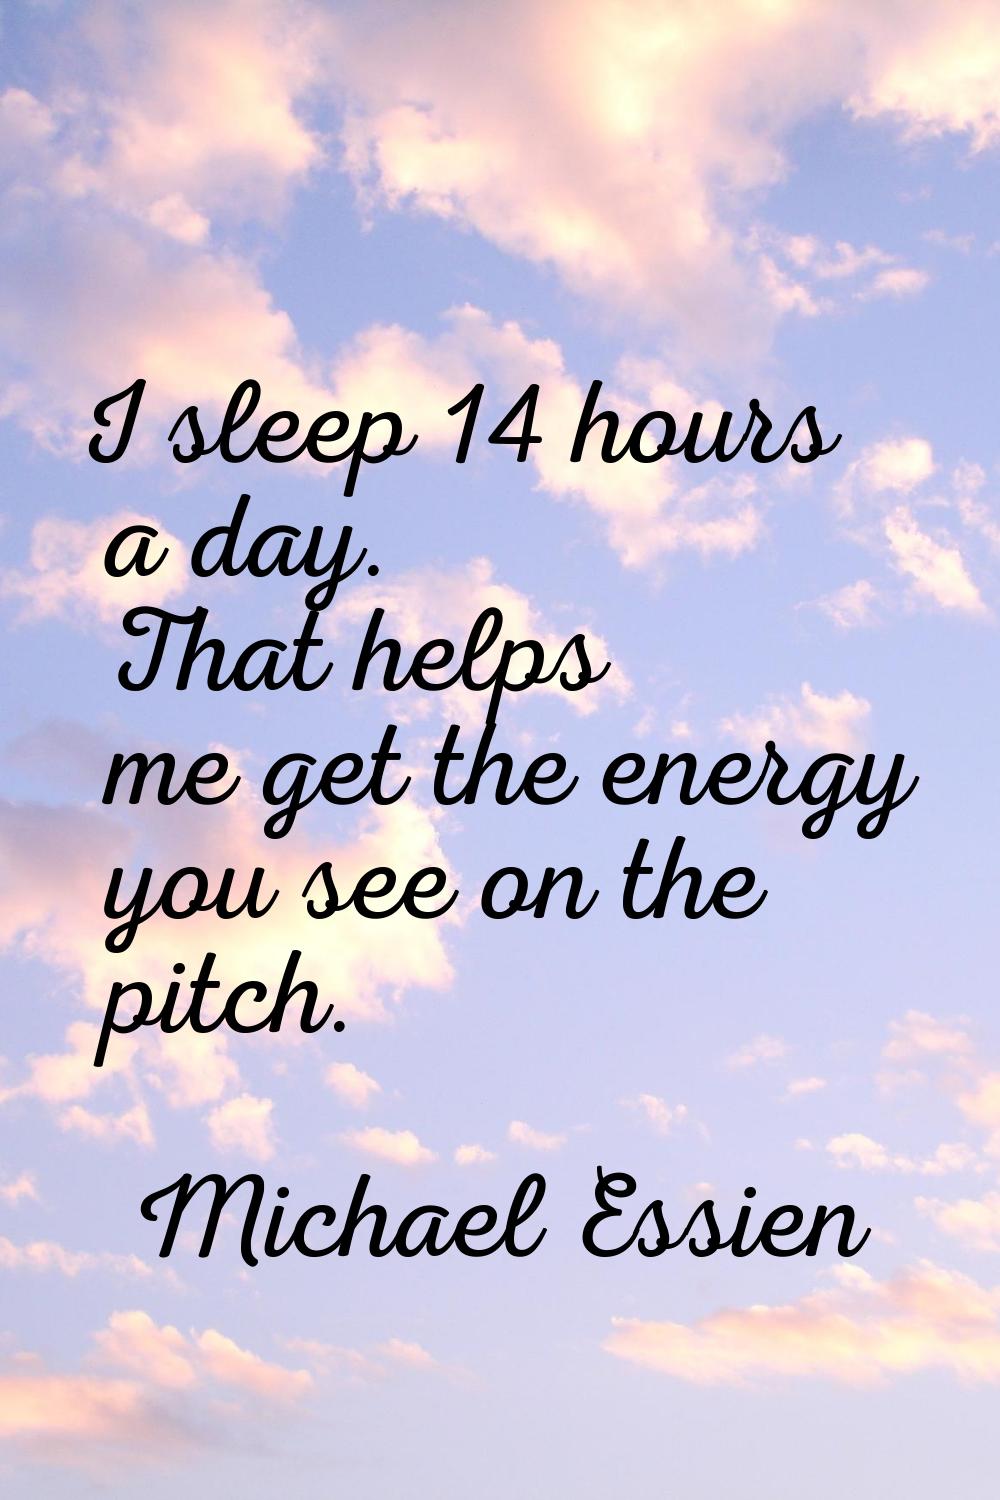 I sleep 14 hours a day. That helps me get the energy you see on the pitch.